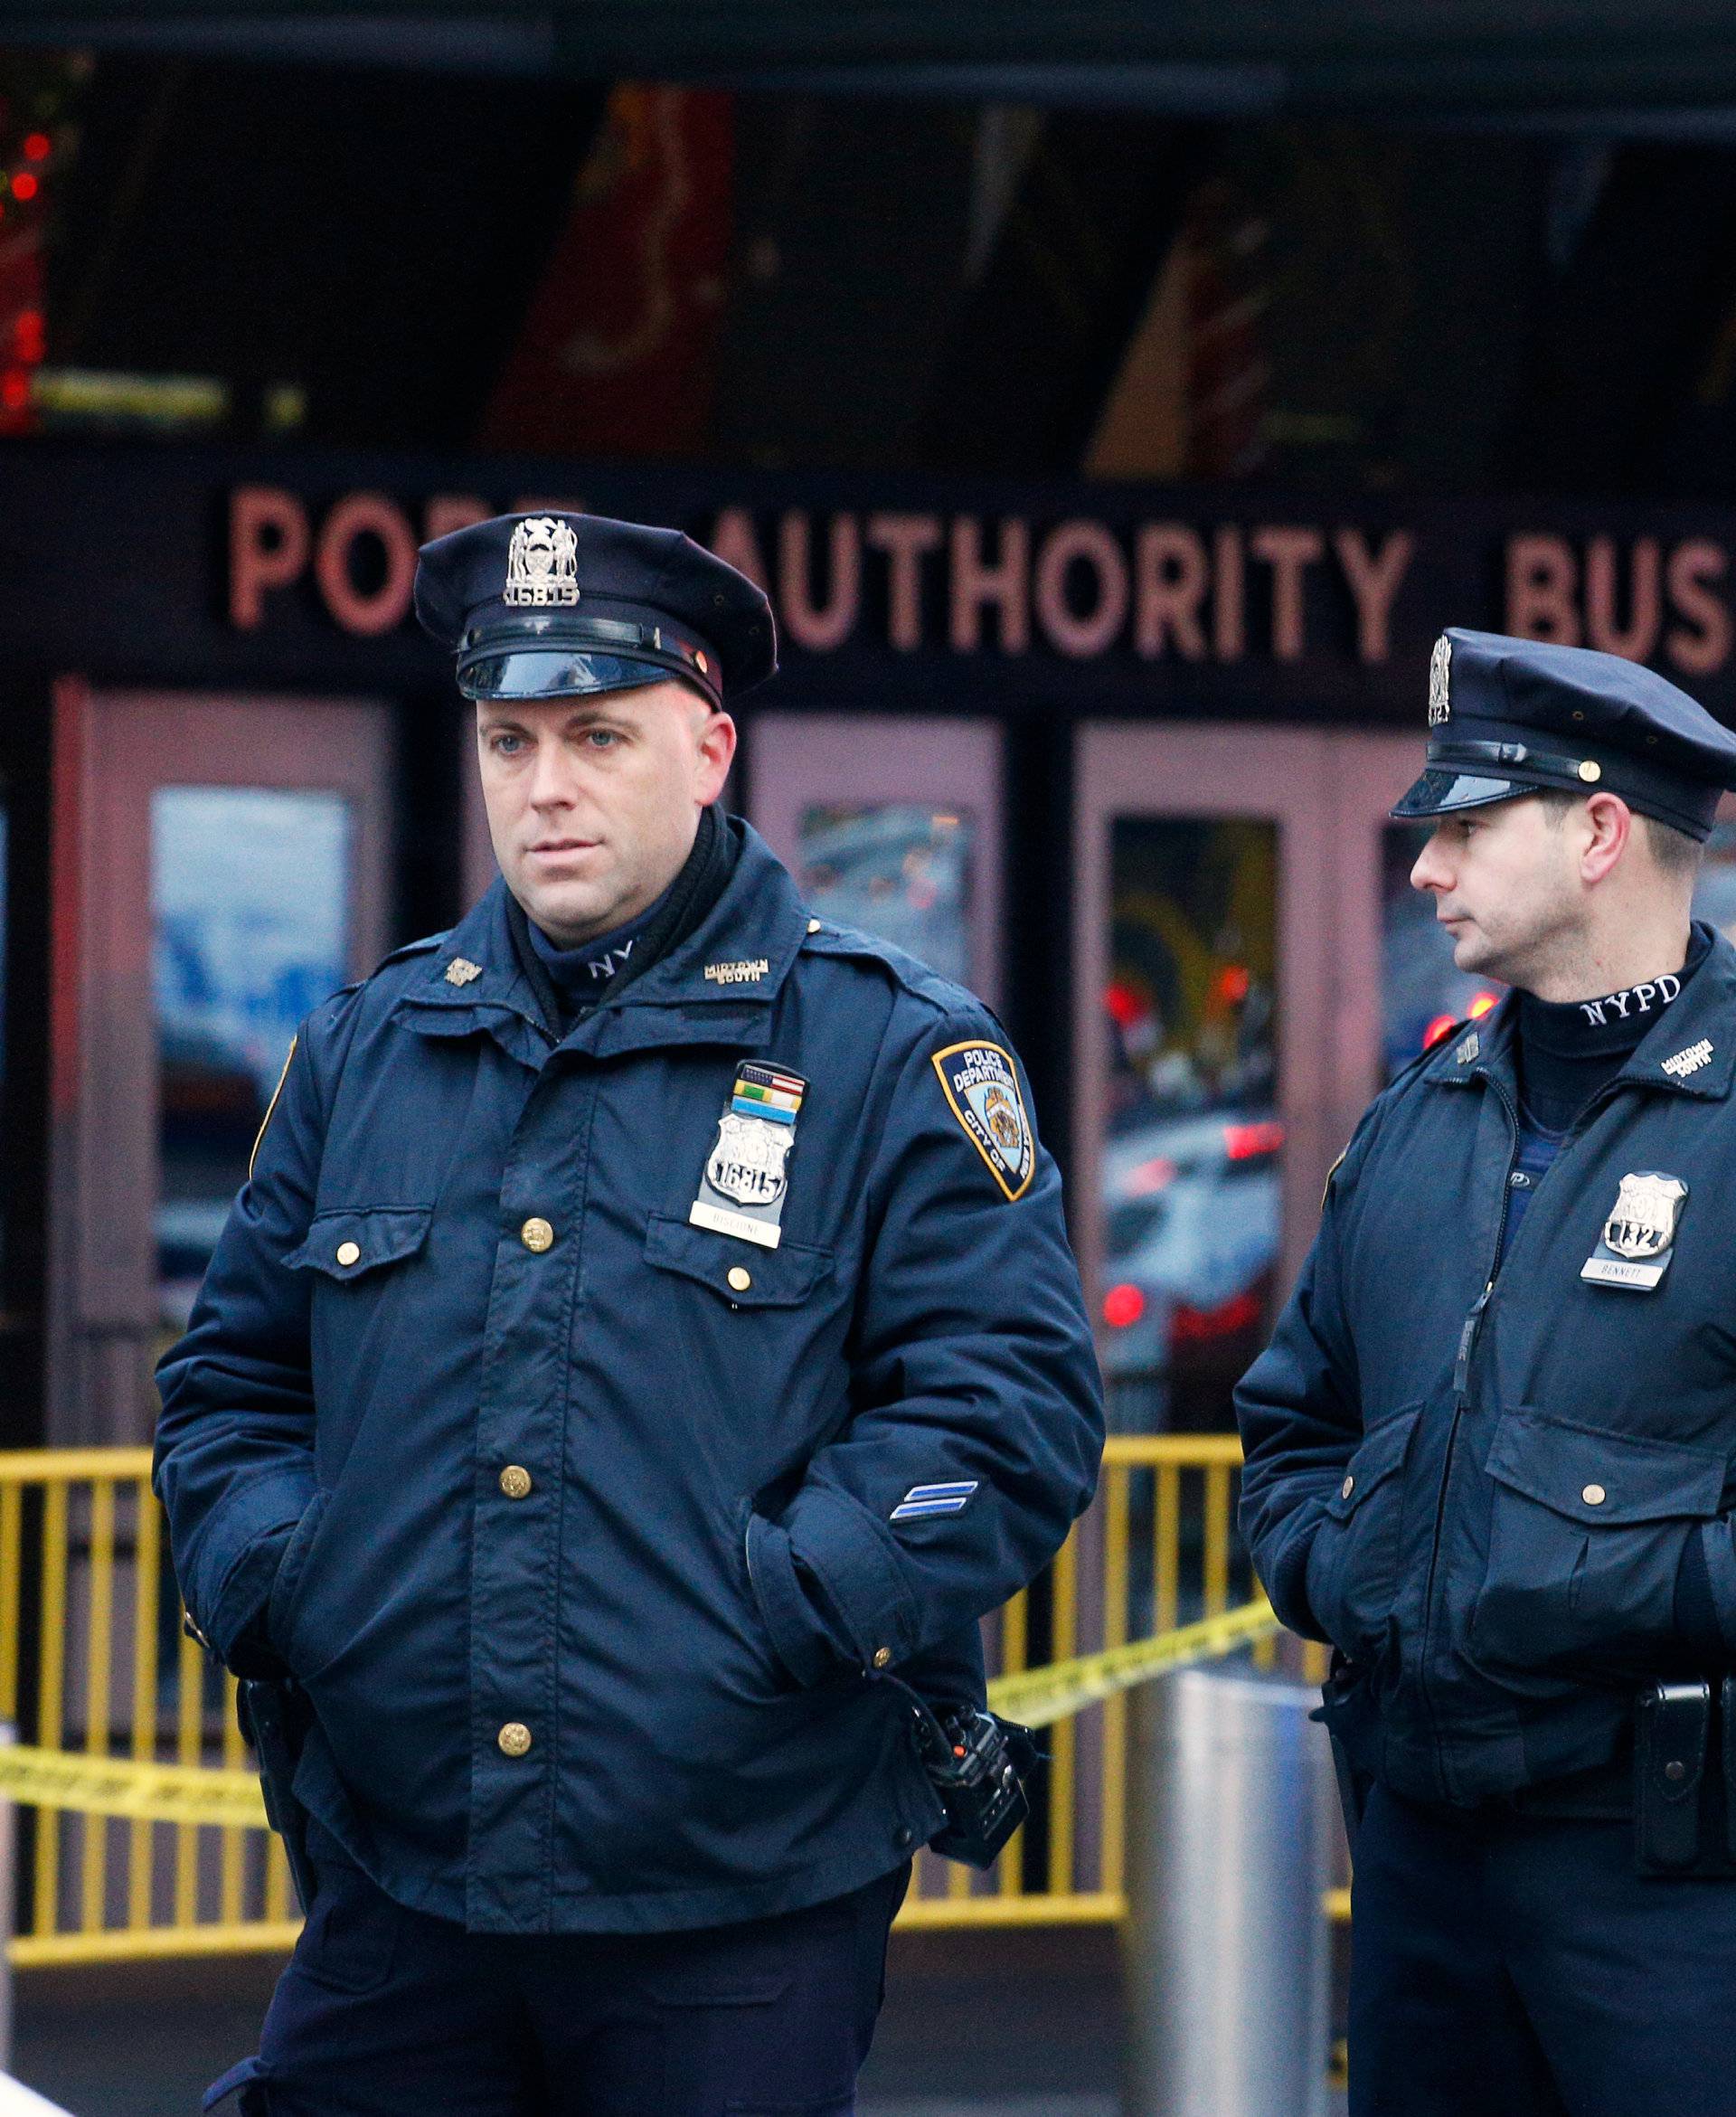 Police officers stand outside the New York Port Authority Bus Terminal in New York City after reports of an explosion